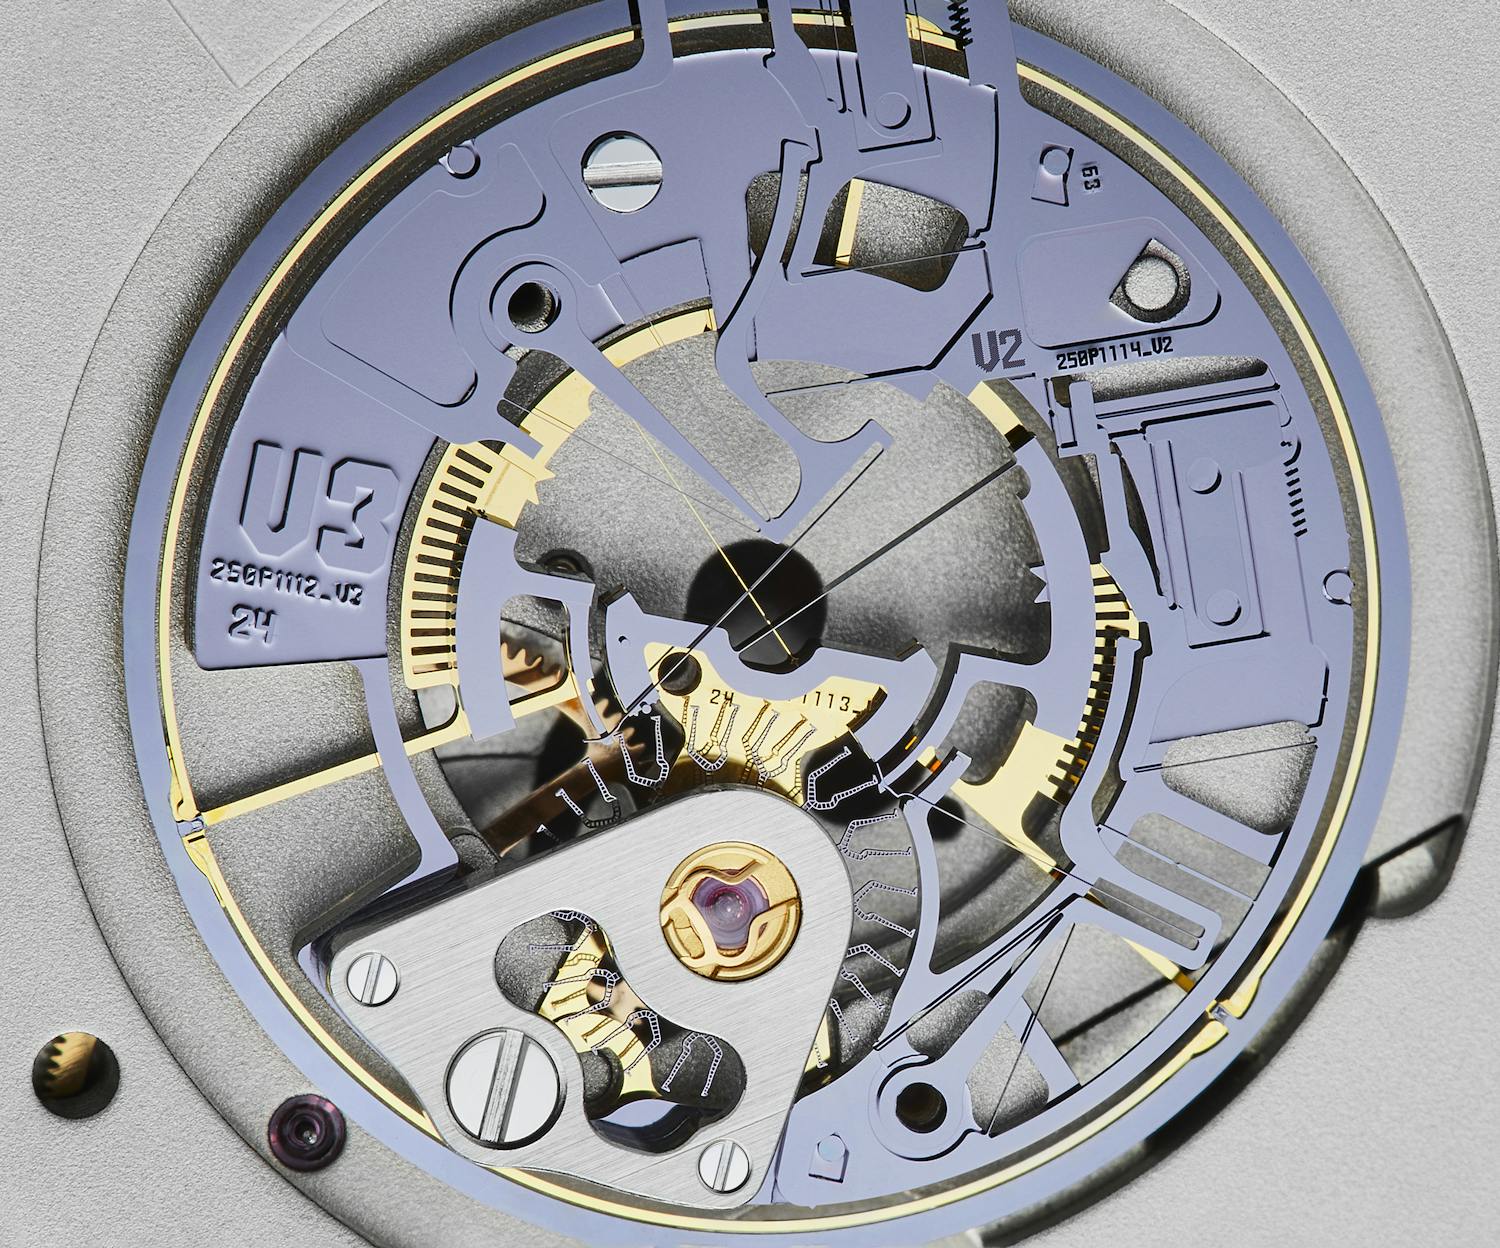 Silicon-based flexure mechanisms in mechanical watches